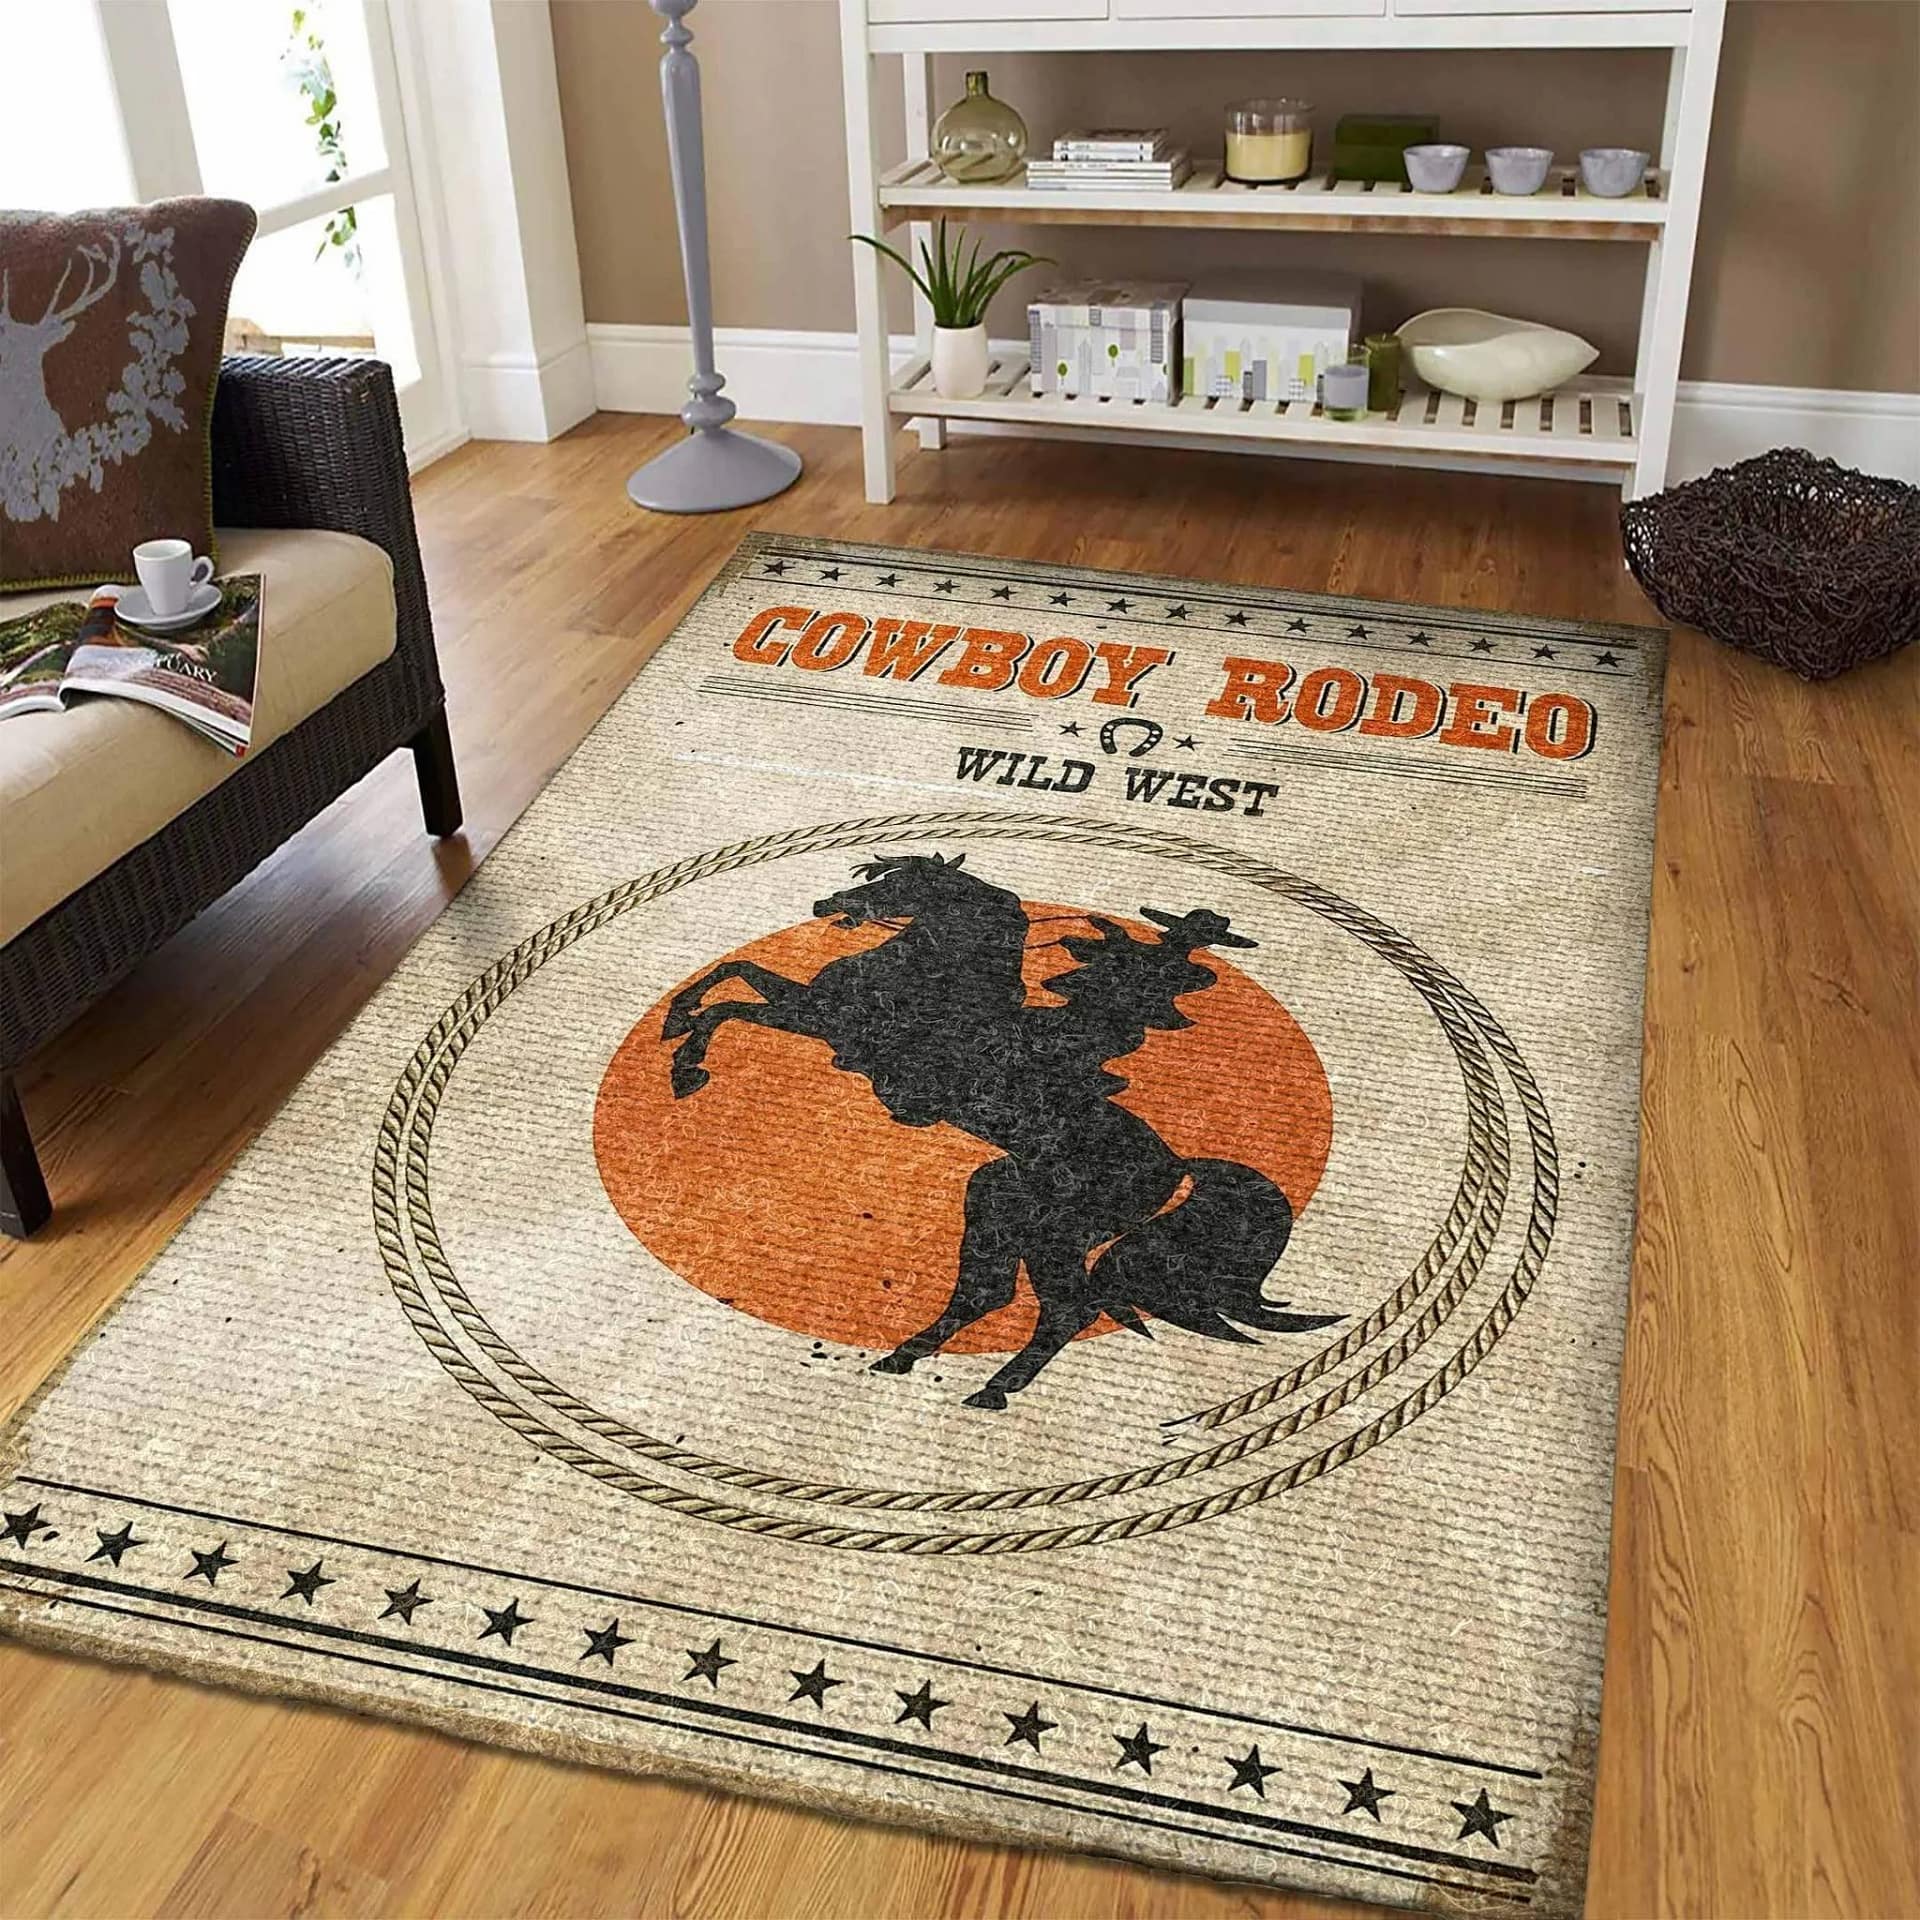 Cowboy Rodeo Limited Edition Amazon Best Seller Sku 262524 Rug